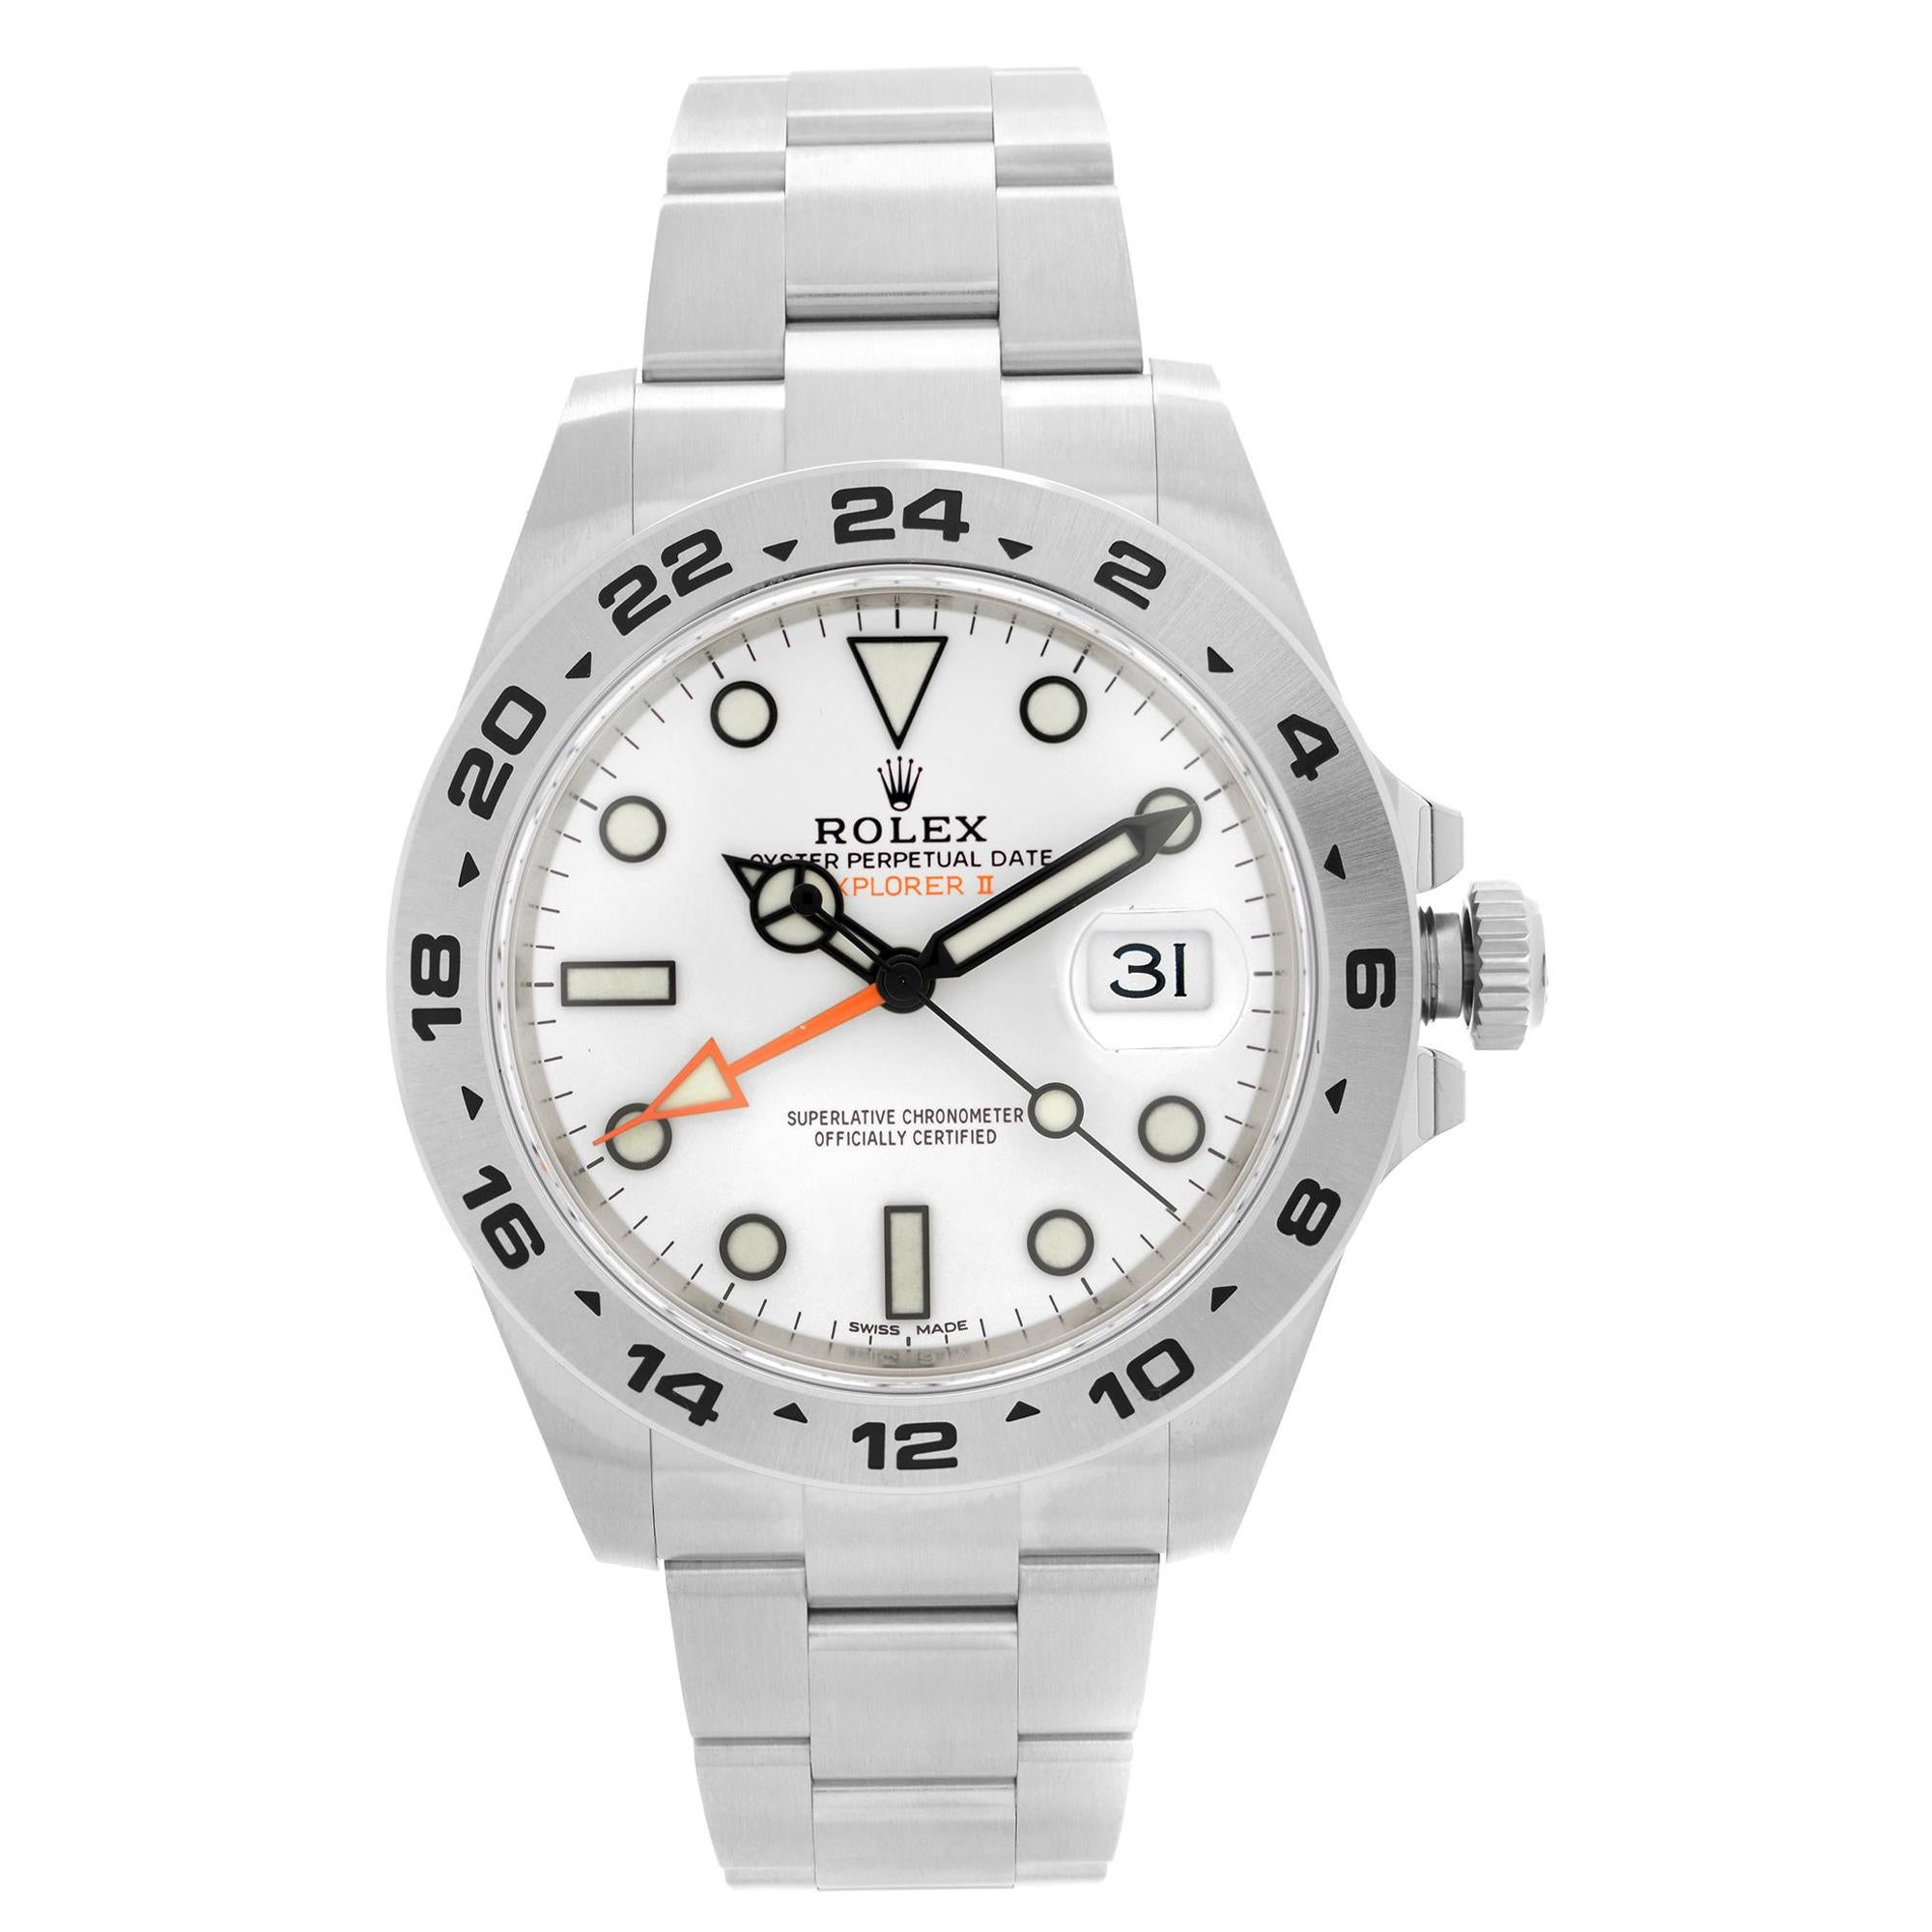 Rolex Explorer II GMT Stainless Steel White Dial Automatic Men Watch 216570